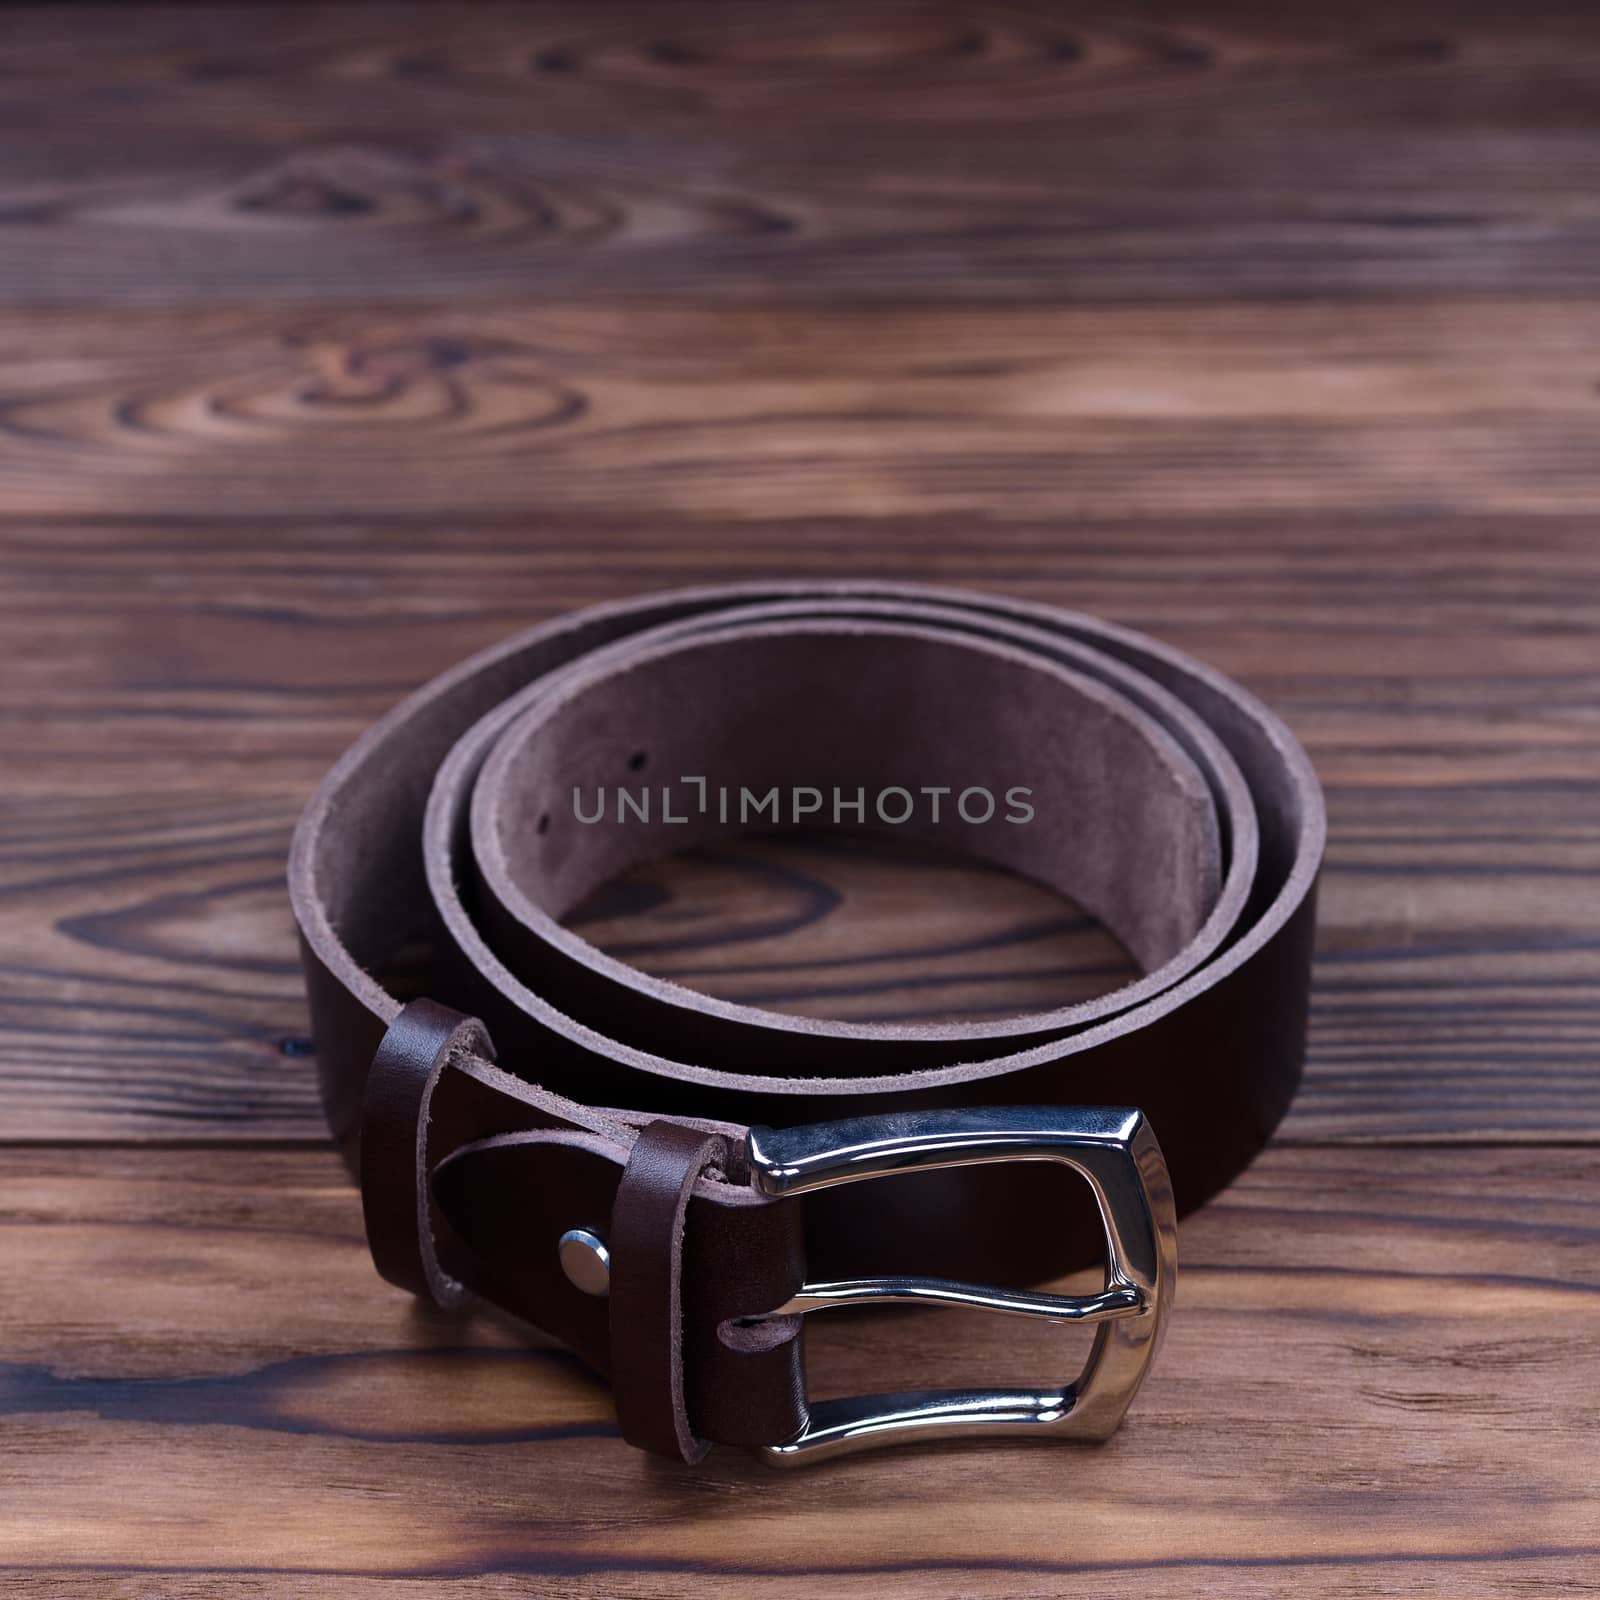 Brown color handmade belt lies on textured wooden background. The belt is twisted into a ring. Closeup side view. Stock photo of businessman accessories. by alexsdriver